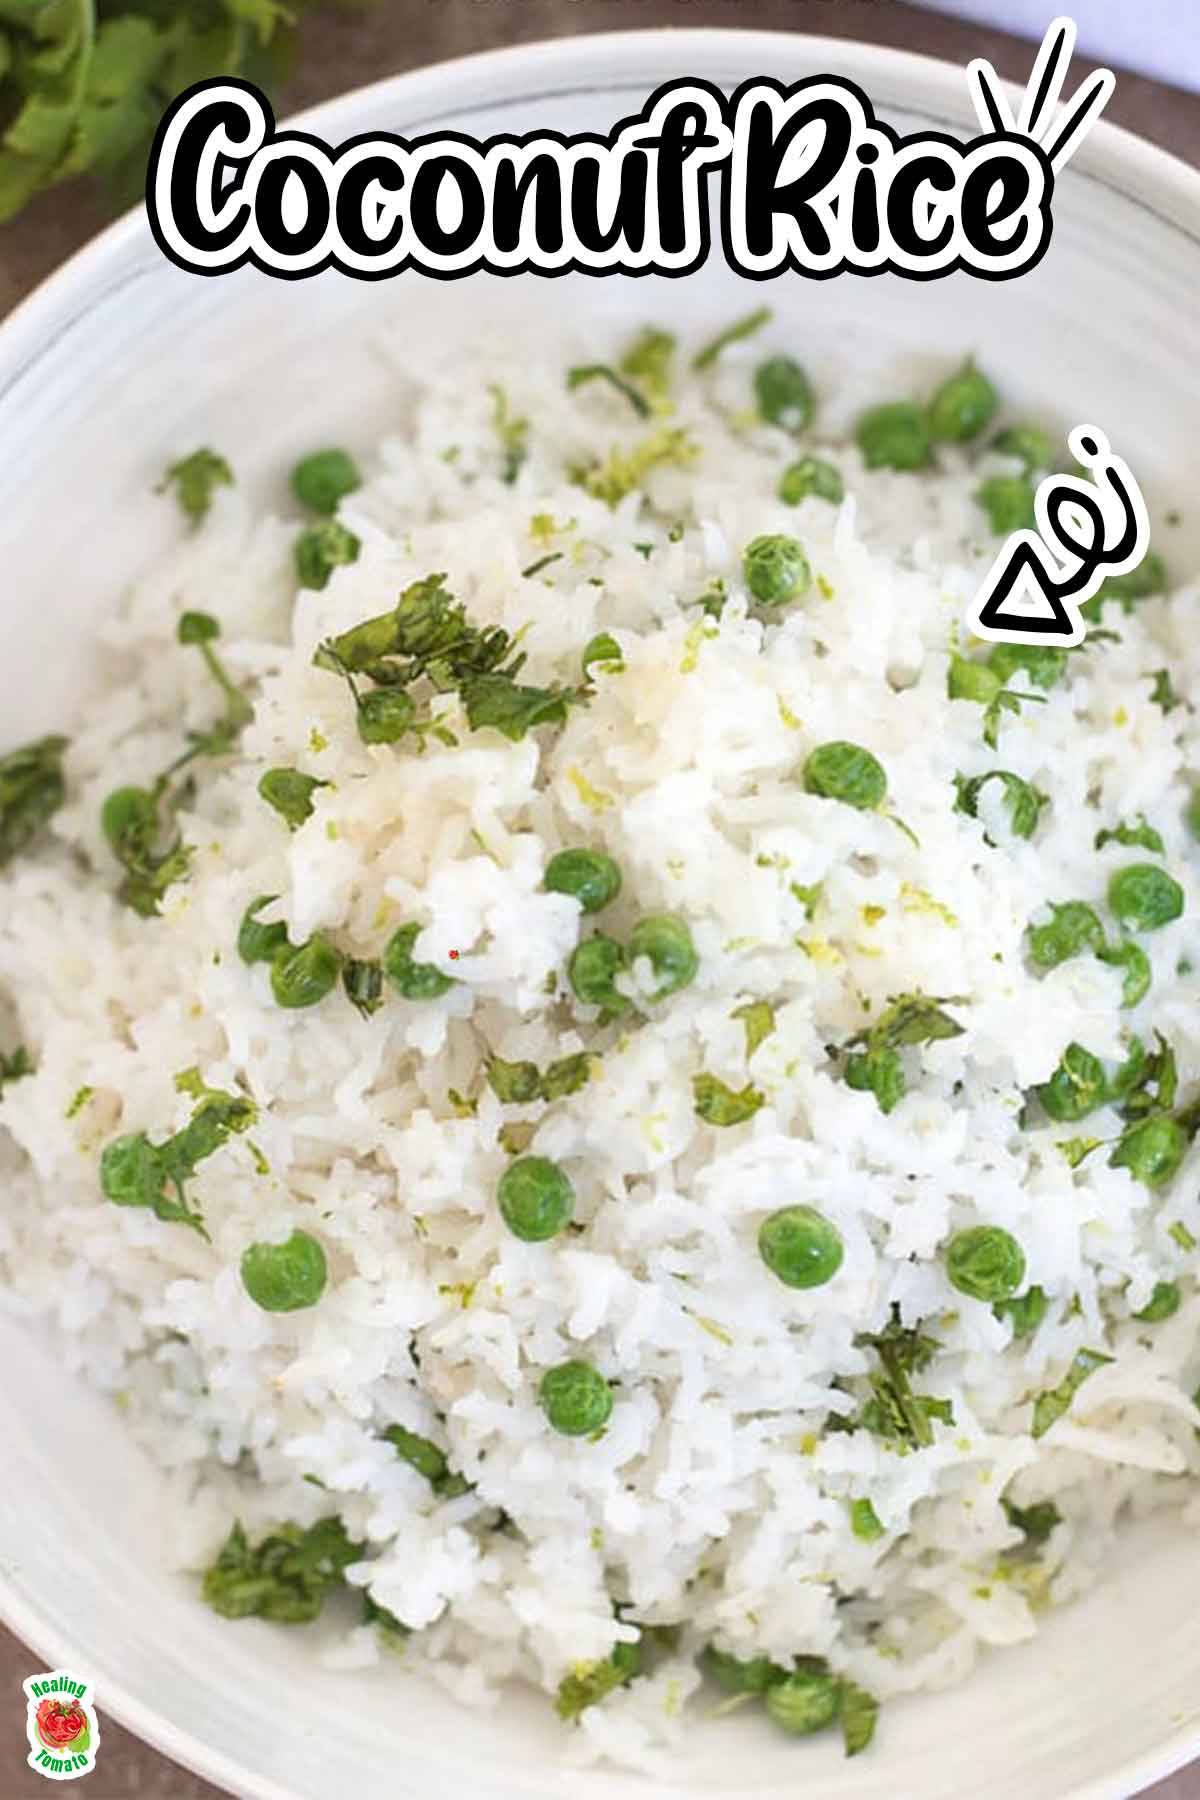 Top view of a white bowl filled with coconut rice and green peas.